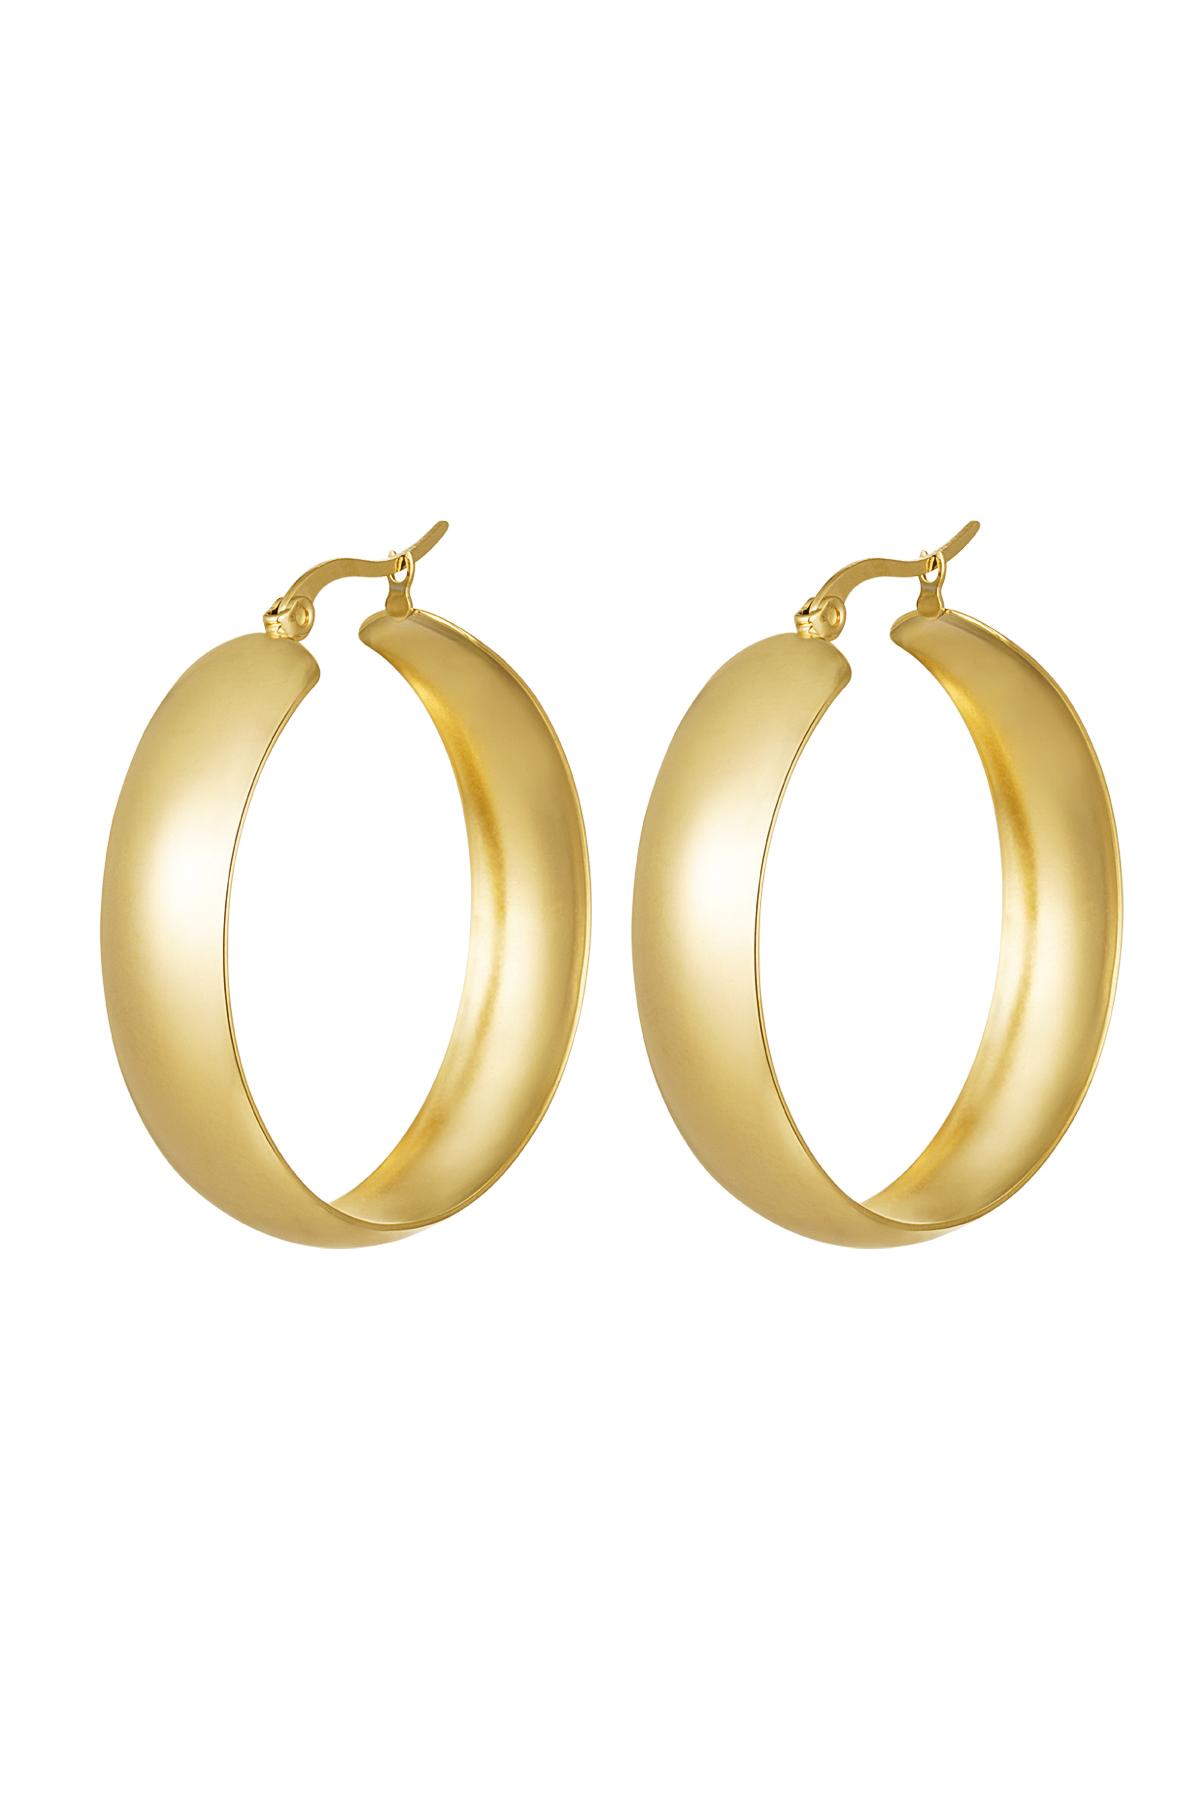 Earrings stainless steel chic Gold h5 